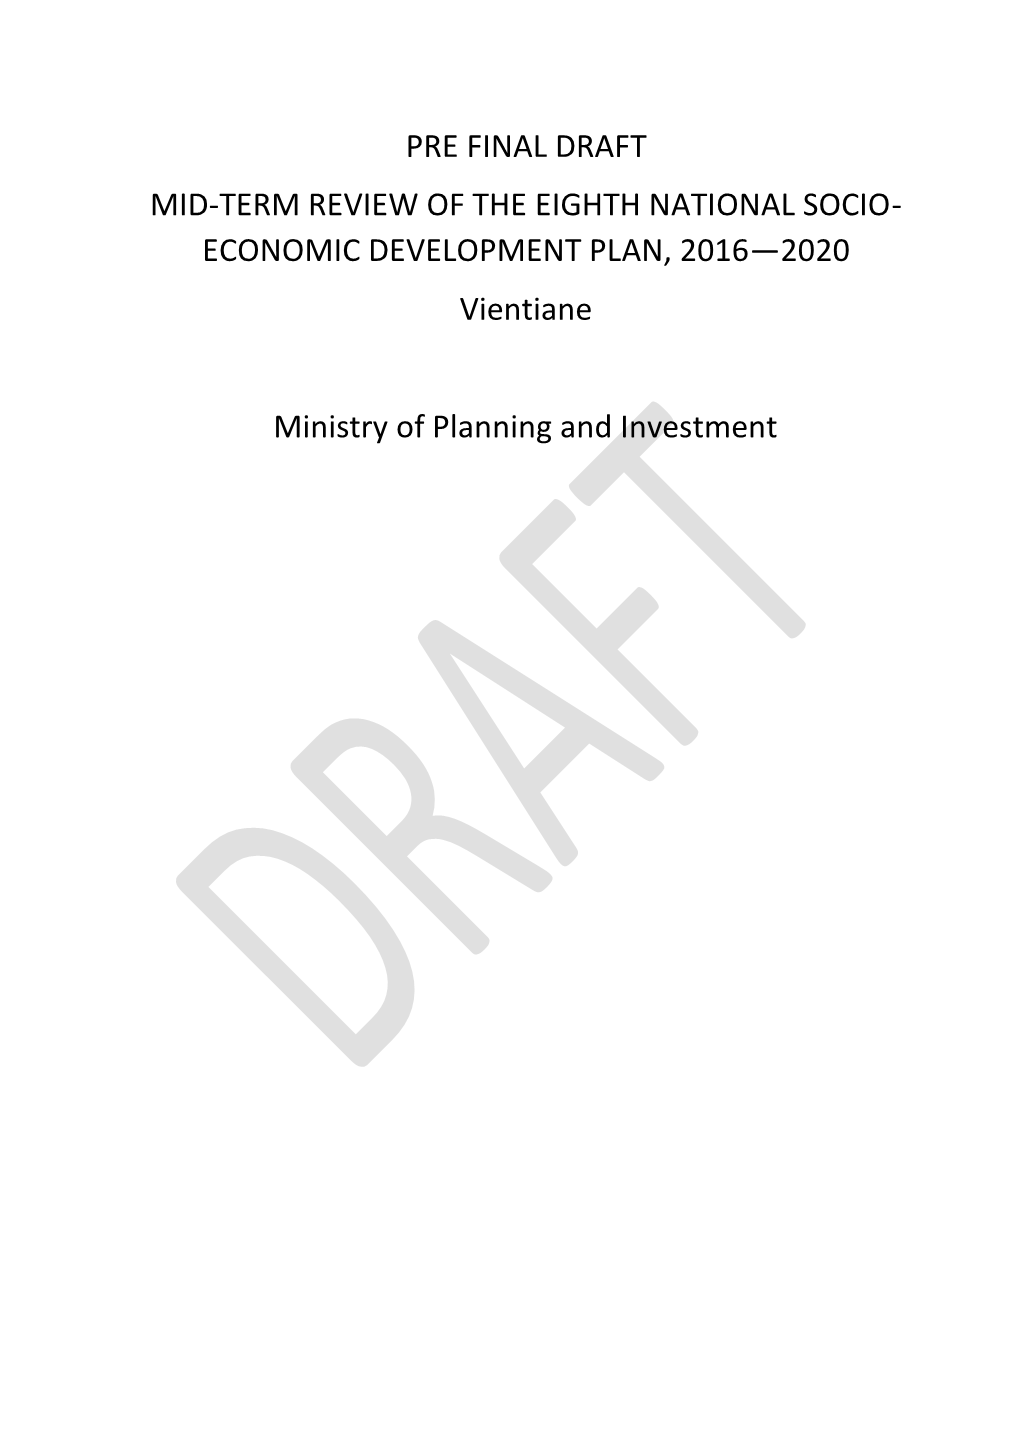 PRE FINAL DRAFT MID-TERM REVIEW of the EIGHTH NATIONAL SOCIO- ECONOMIC DEVELOPMENT PLAN, 2016—2020 Vientiane